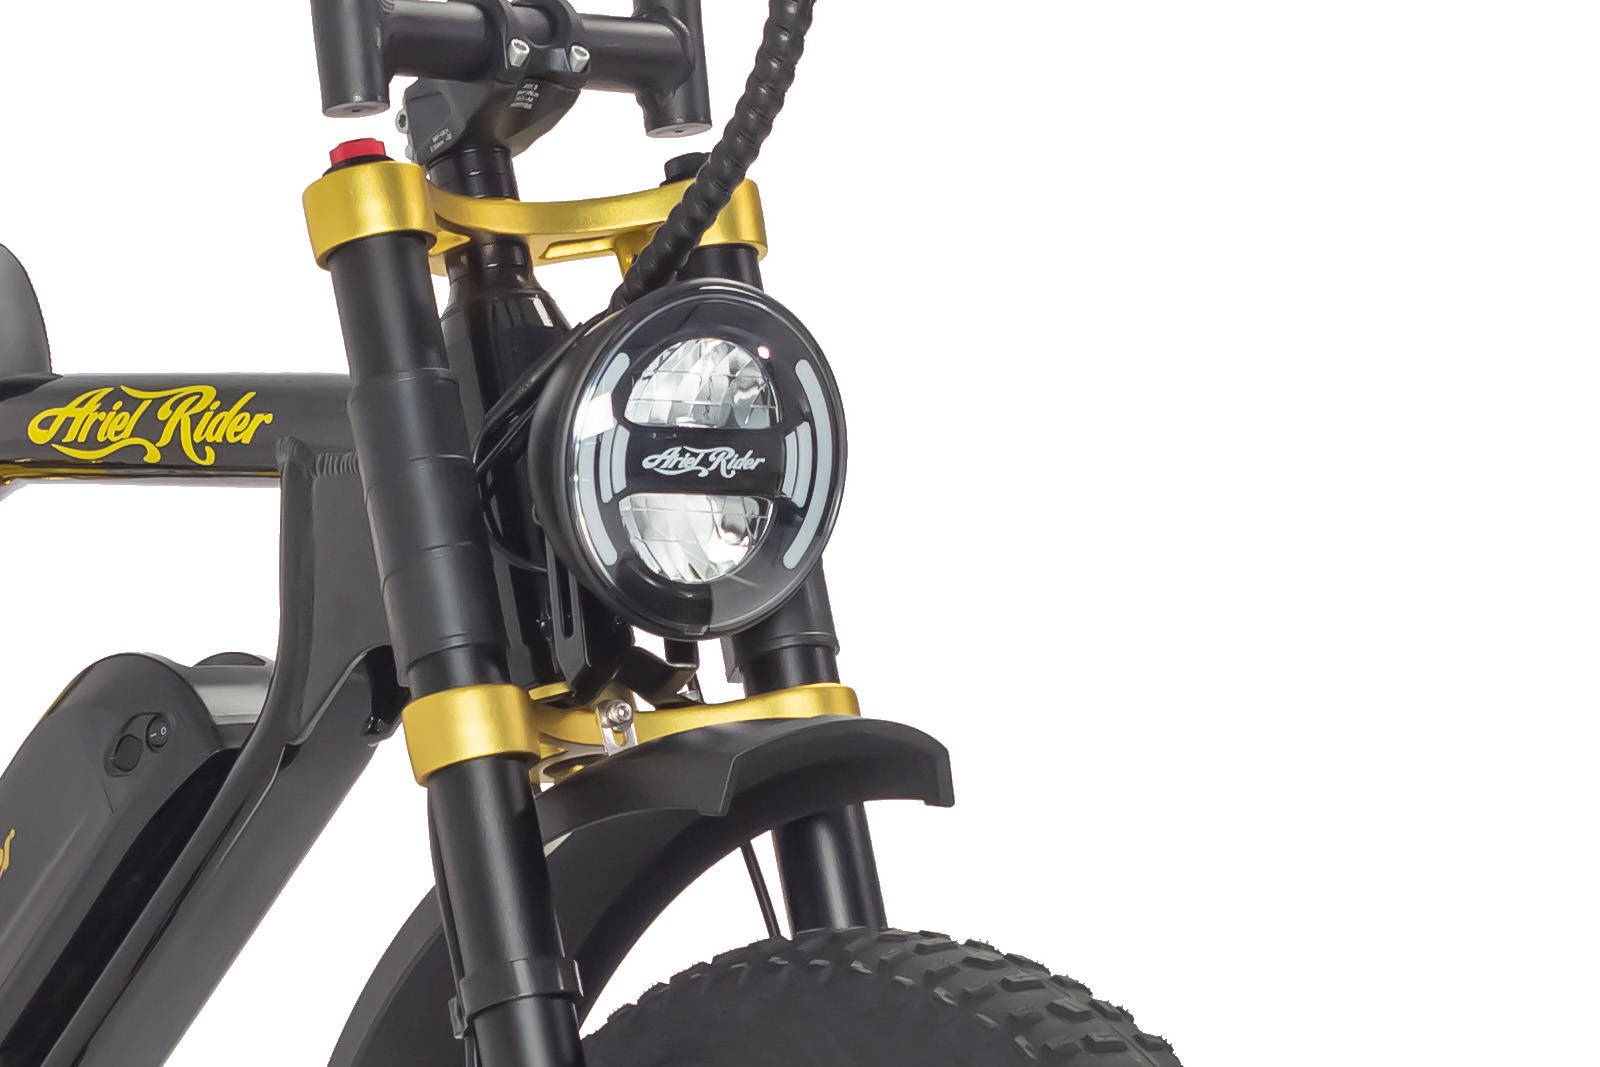 A photo of the Ariel Rider Grizzly ebike, featuring powerful and bright headlights for optimal visibility on any ride.